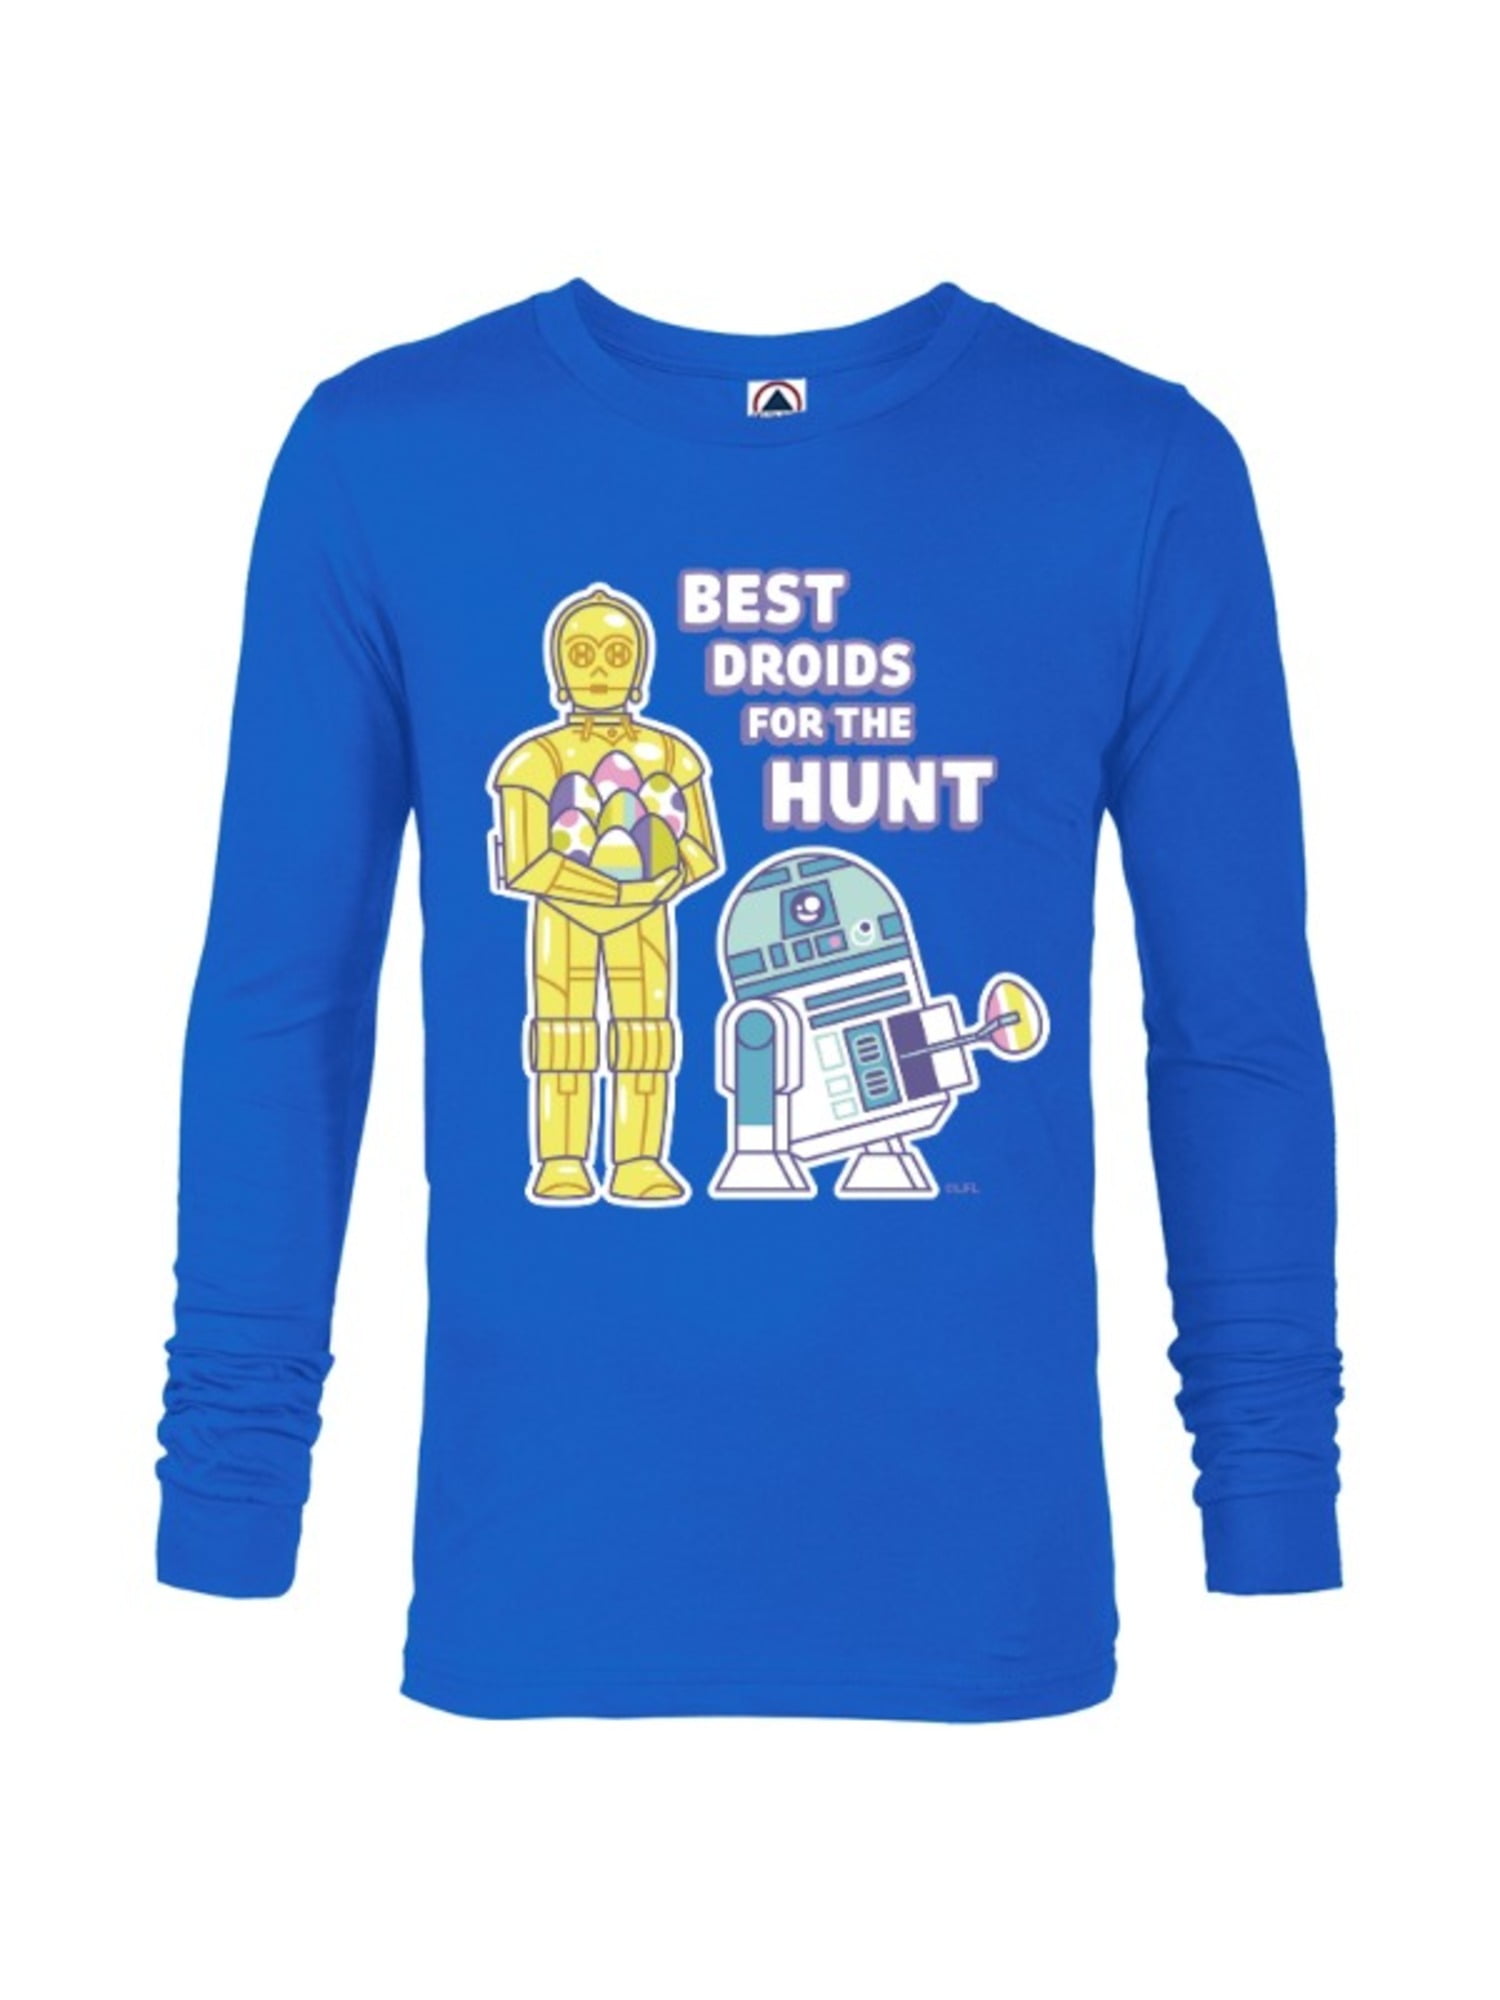 Star Wars Best Droids For the Hunt Easter T-Shirt Unisex Adult T-shirt Kid shirt Gift for Birthday Hoodie Sweatshirt Toddler Tee